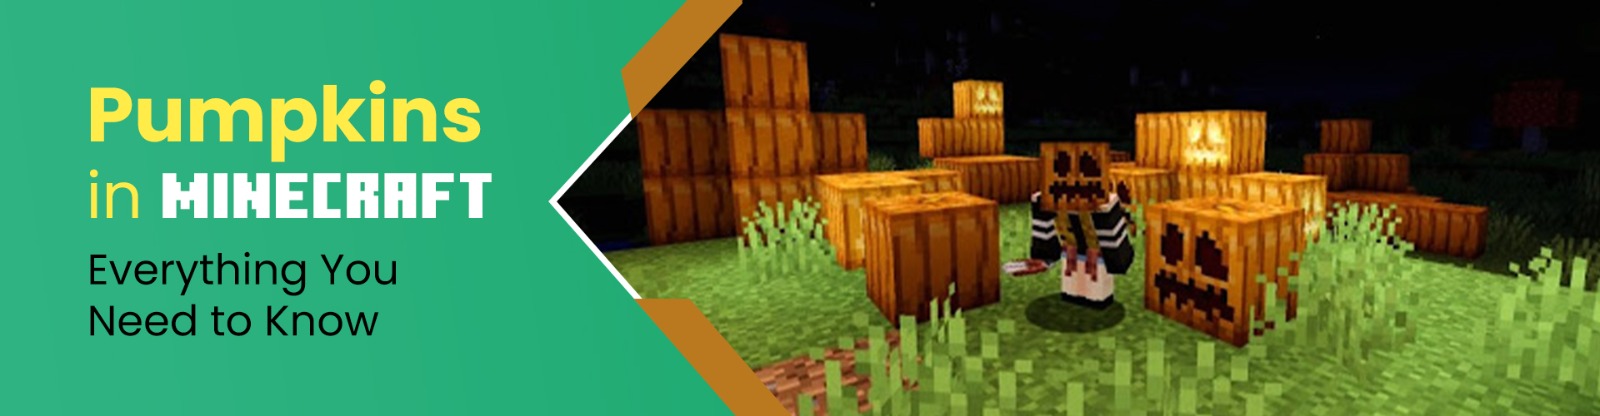 Pumpkins in Minecraft - Everything You Need to Know